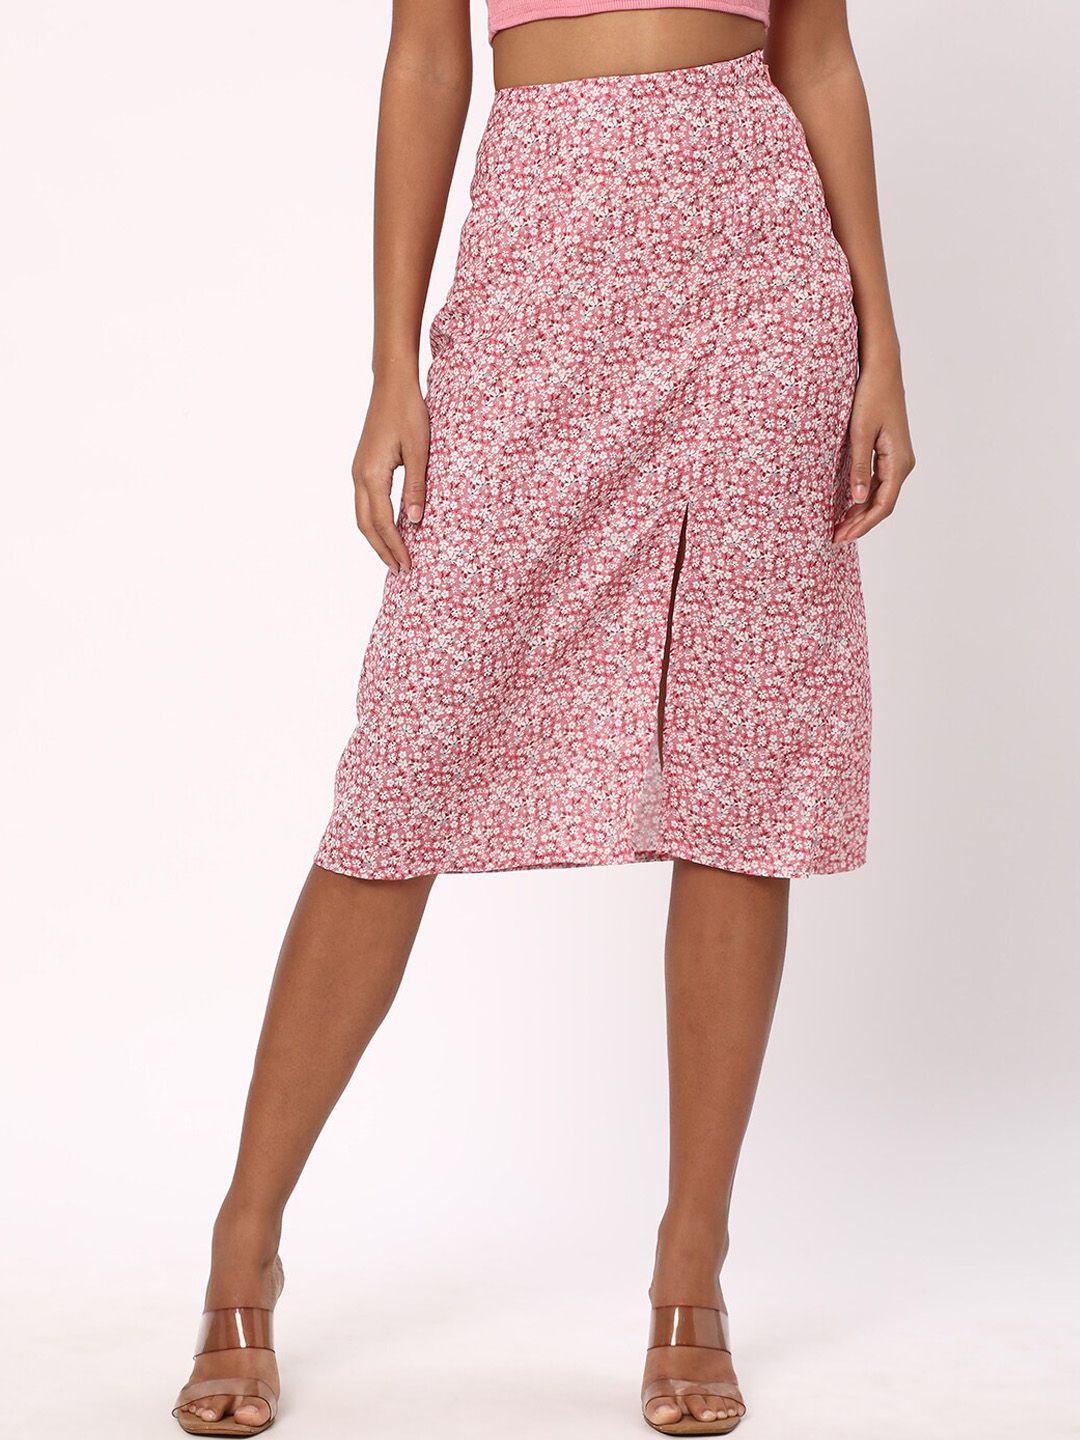 R&B Floral Printed A-Line Skirt Price in India